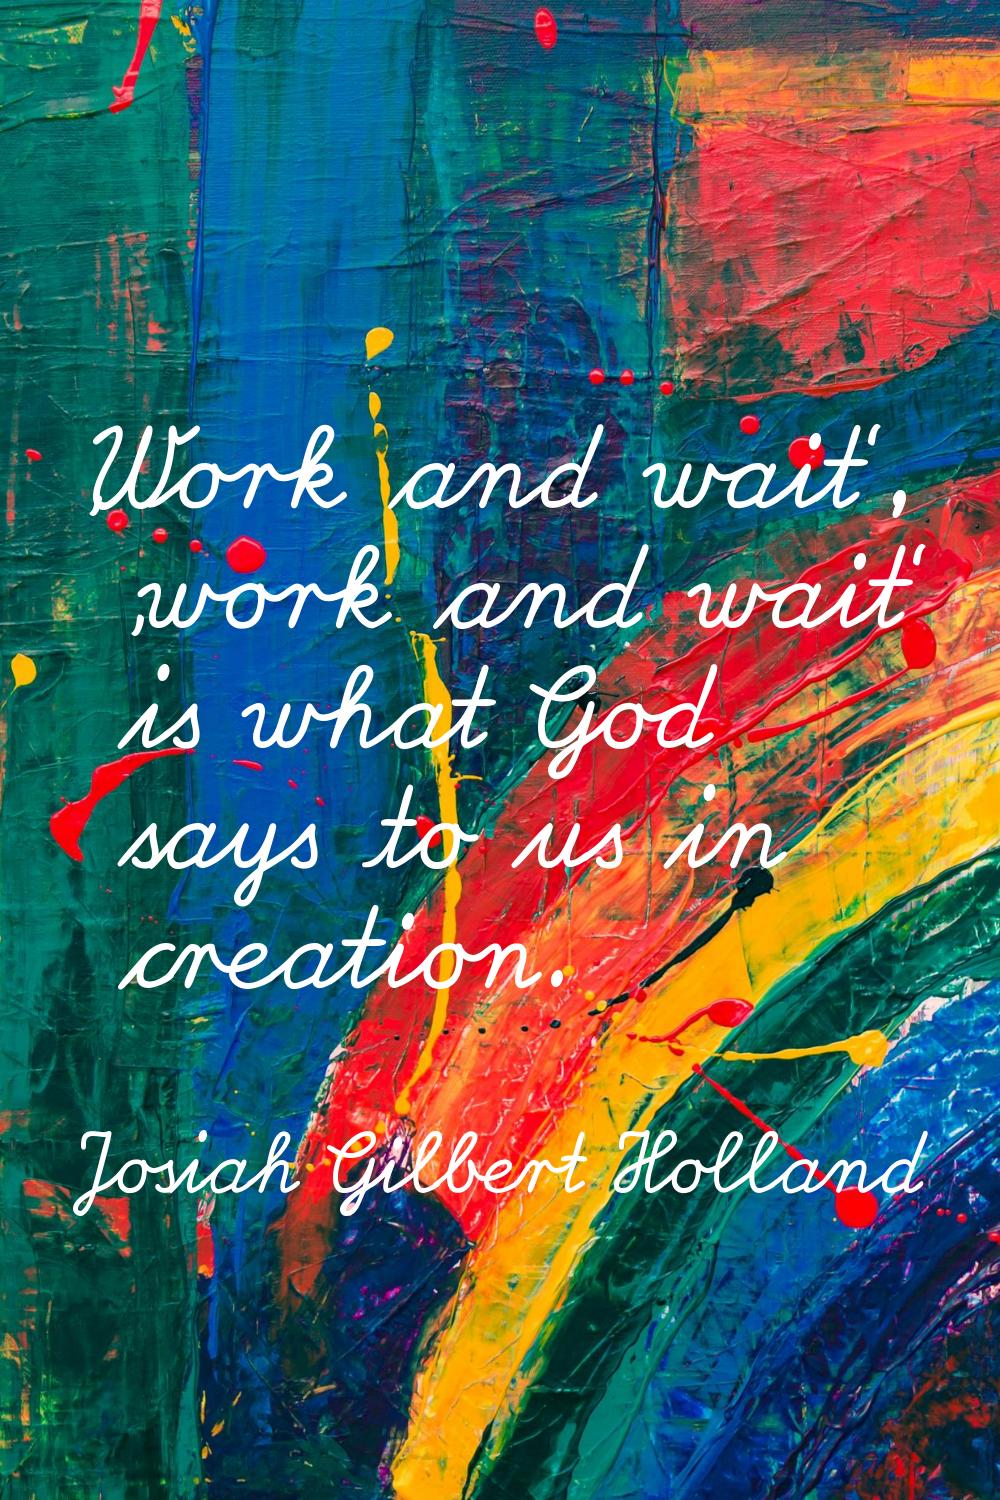 'Work and wait', 'work and wait' is what God says to us in creation.